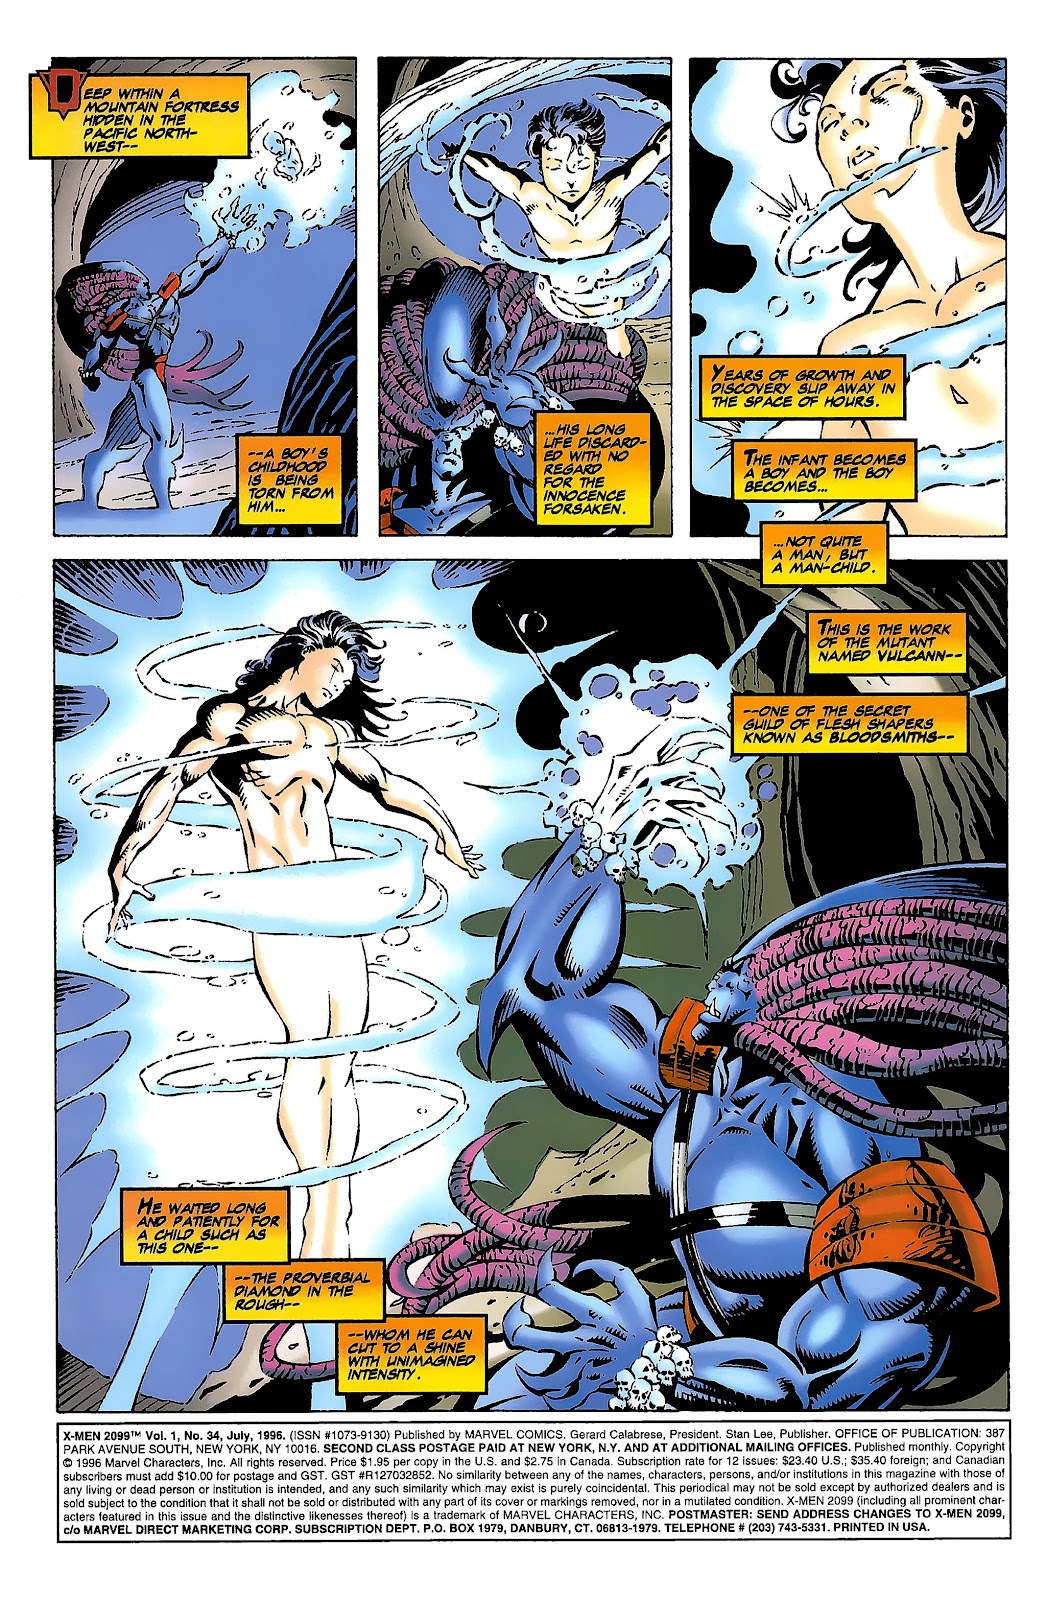 X-Men 2099 issue 34 - Page 2